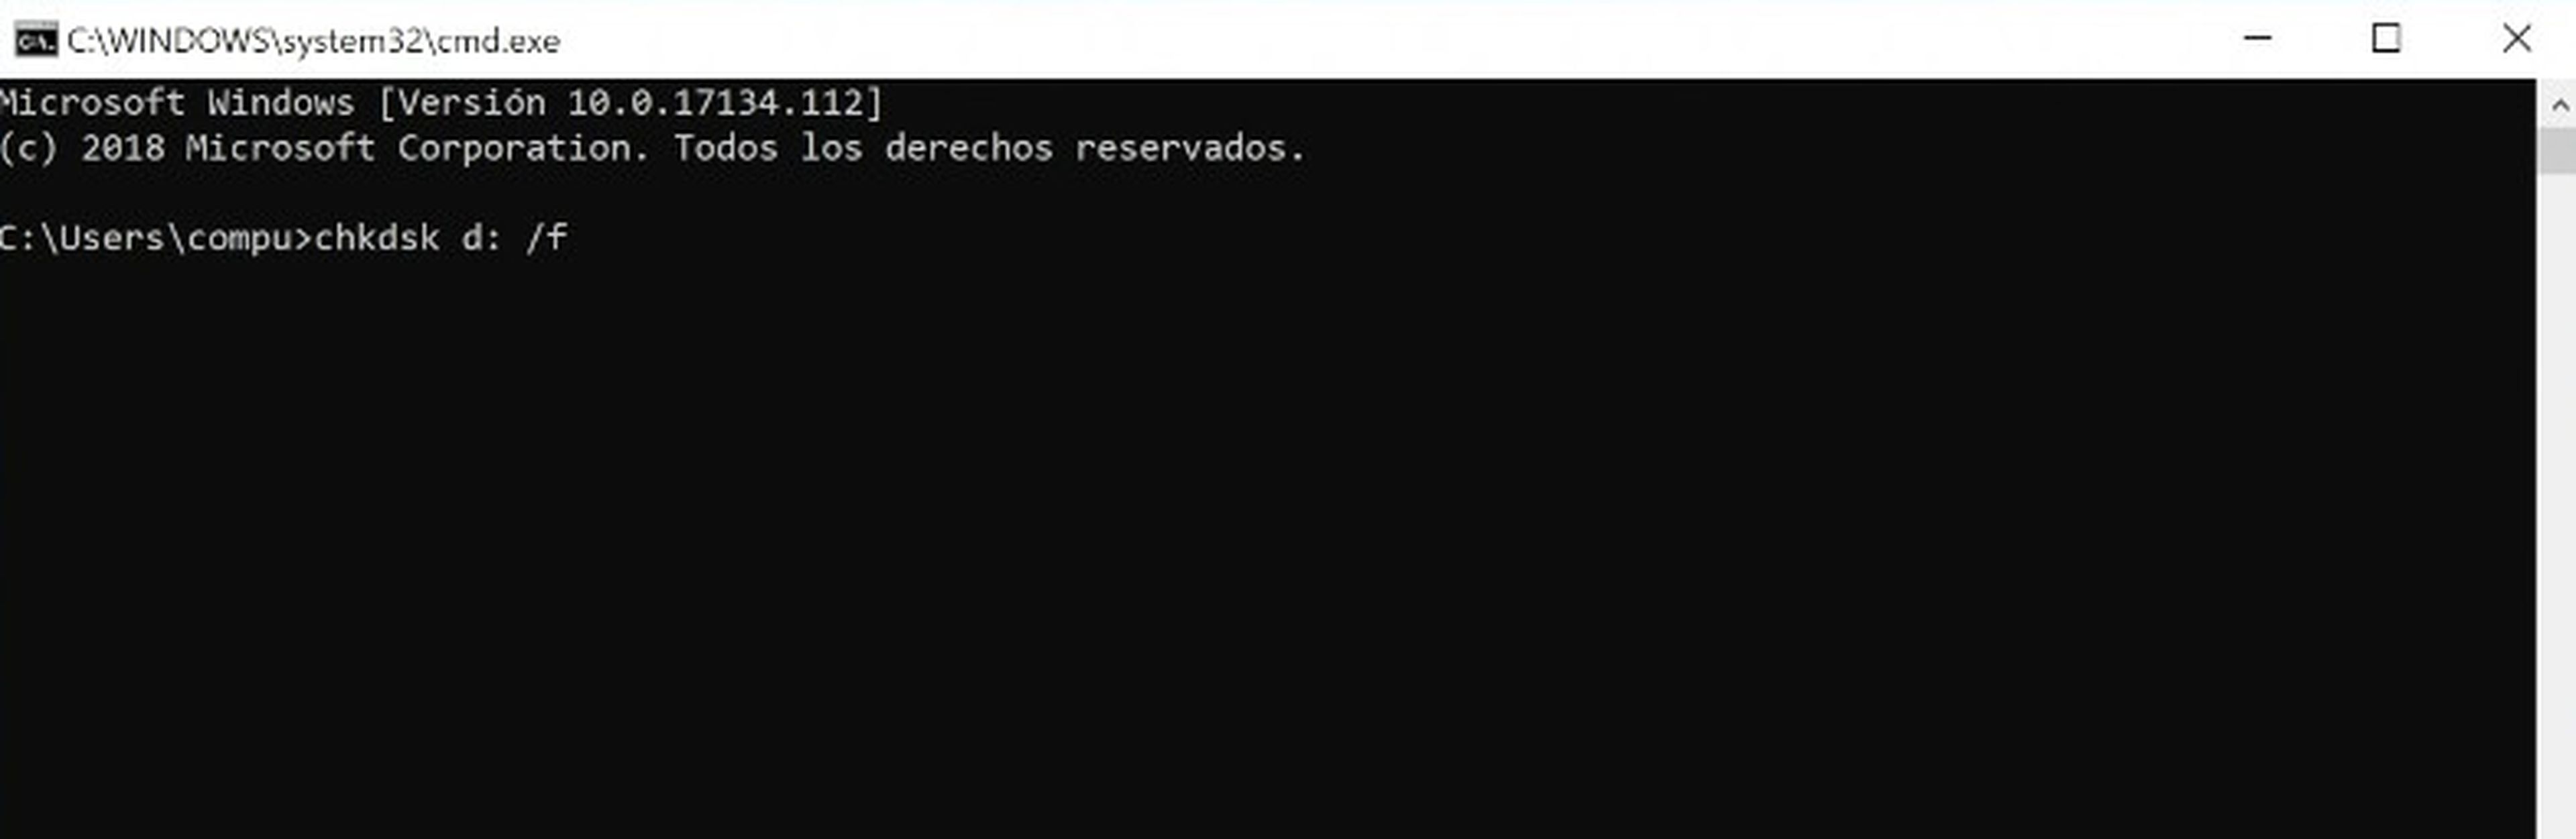 check disk command